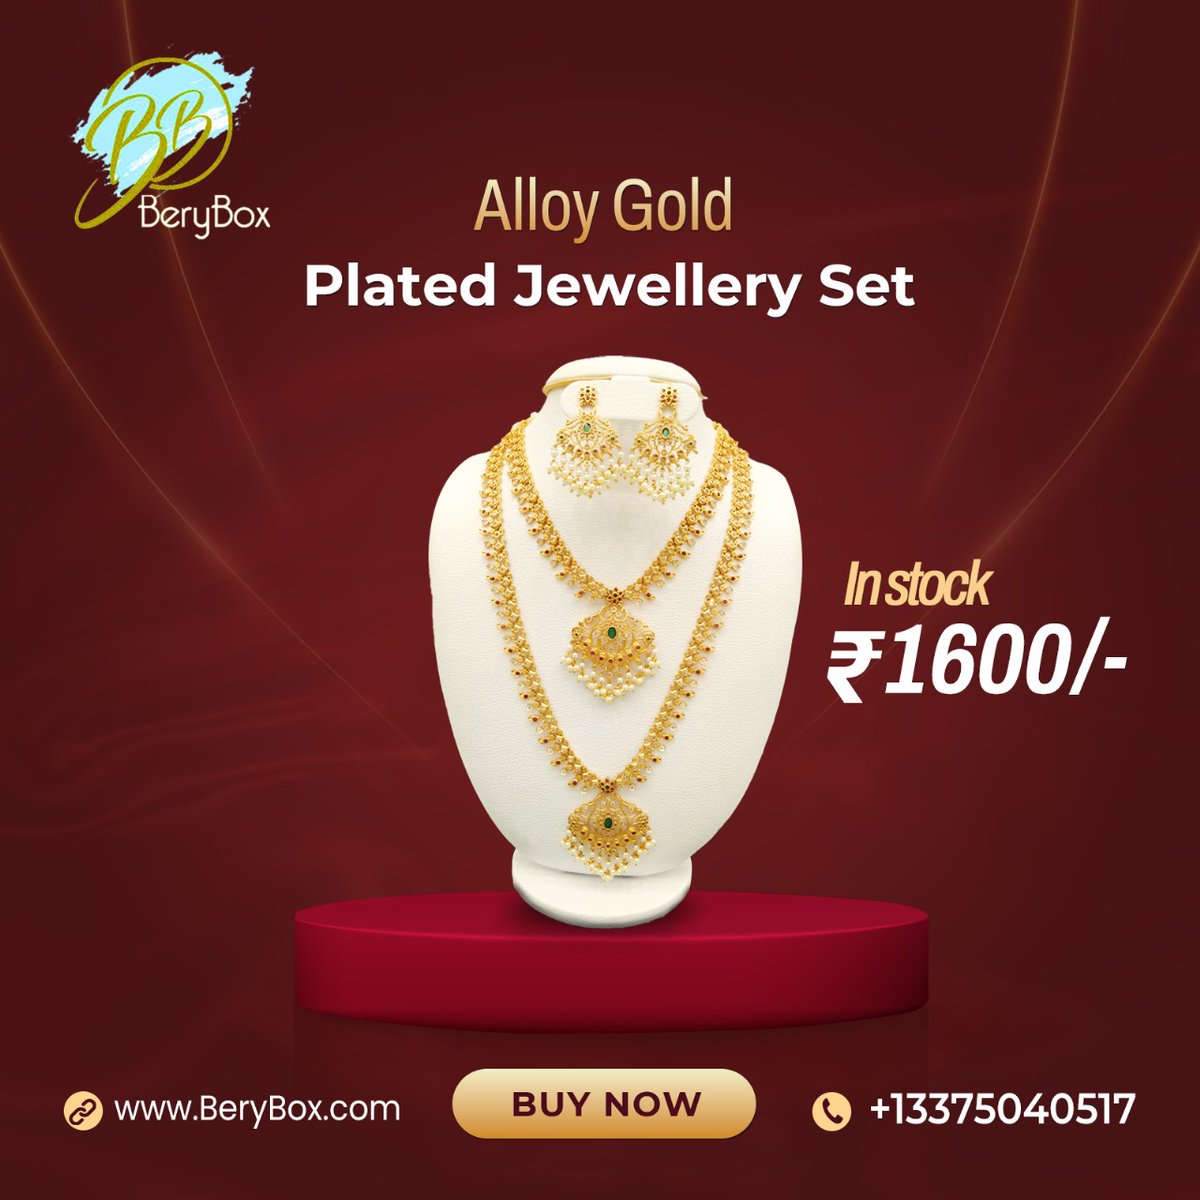 Alloy Gold Plated Jewelry Set
.
For orders, call or text 13375040517
or visit berybox.com
.
#jewelry #jewellerysets #onlineshopping #bangles #nackles #goldjewellery #onlineboutiques #frocks #tshirts #jewellerycollection #sarees #dresses #lehangas #india  #berybox